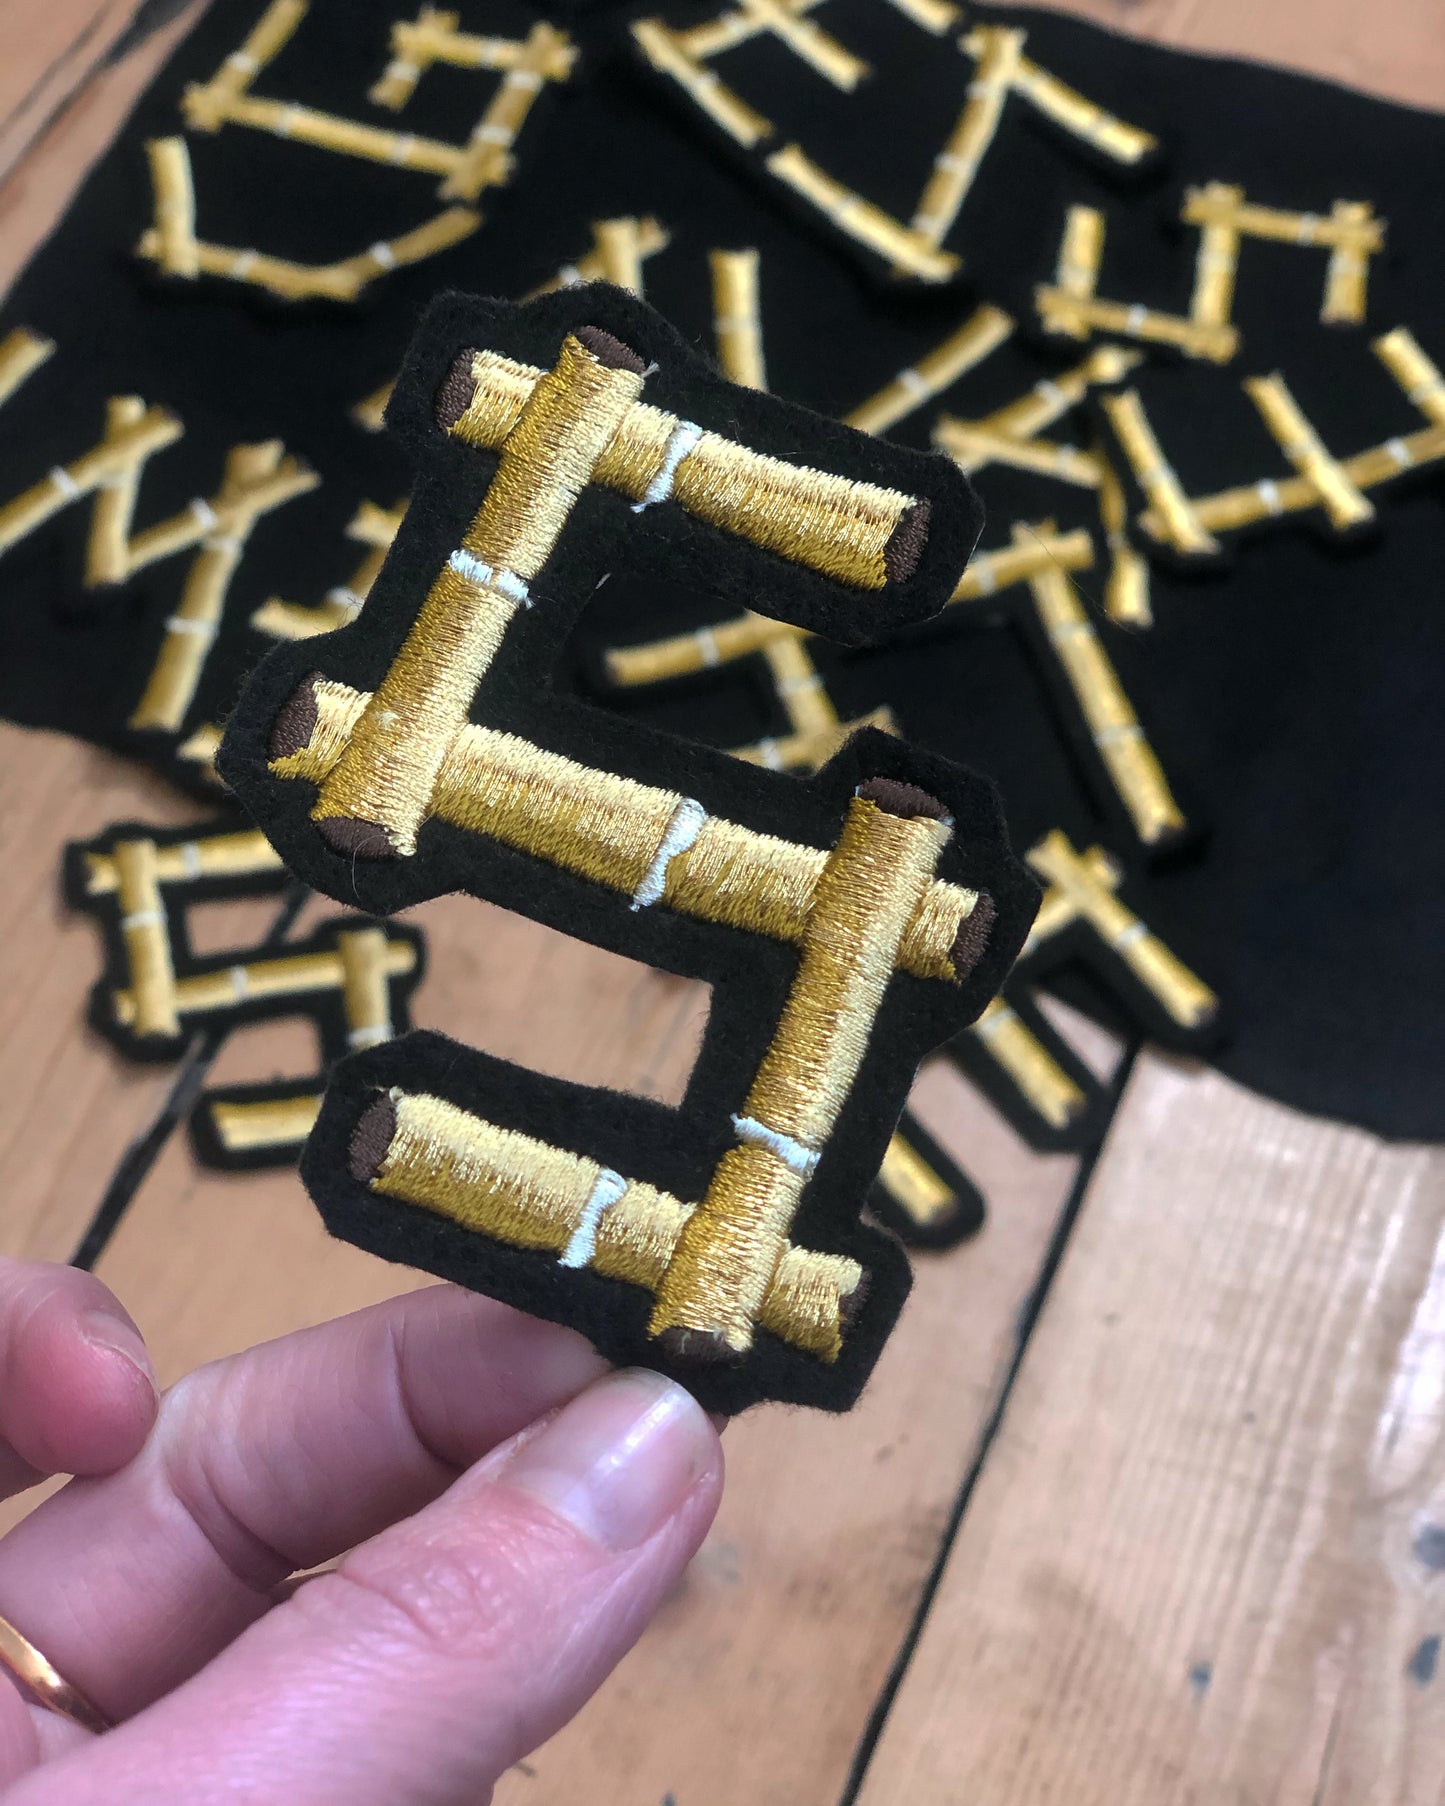 Bamboo embroidered letter S held by a hand with other letters seen in the background